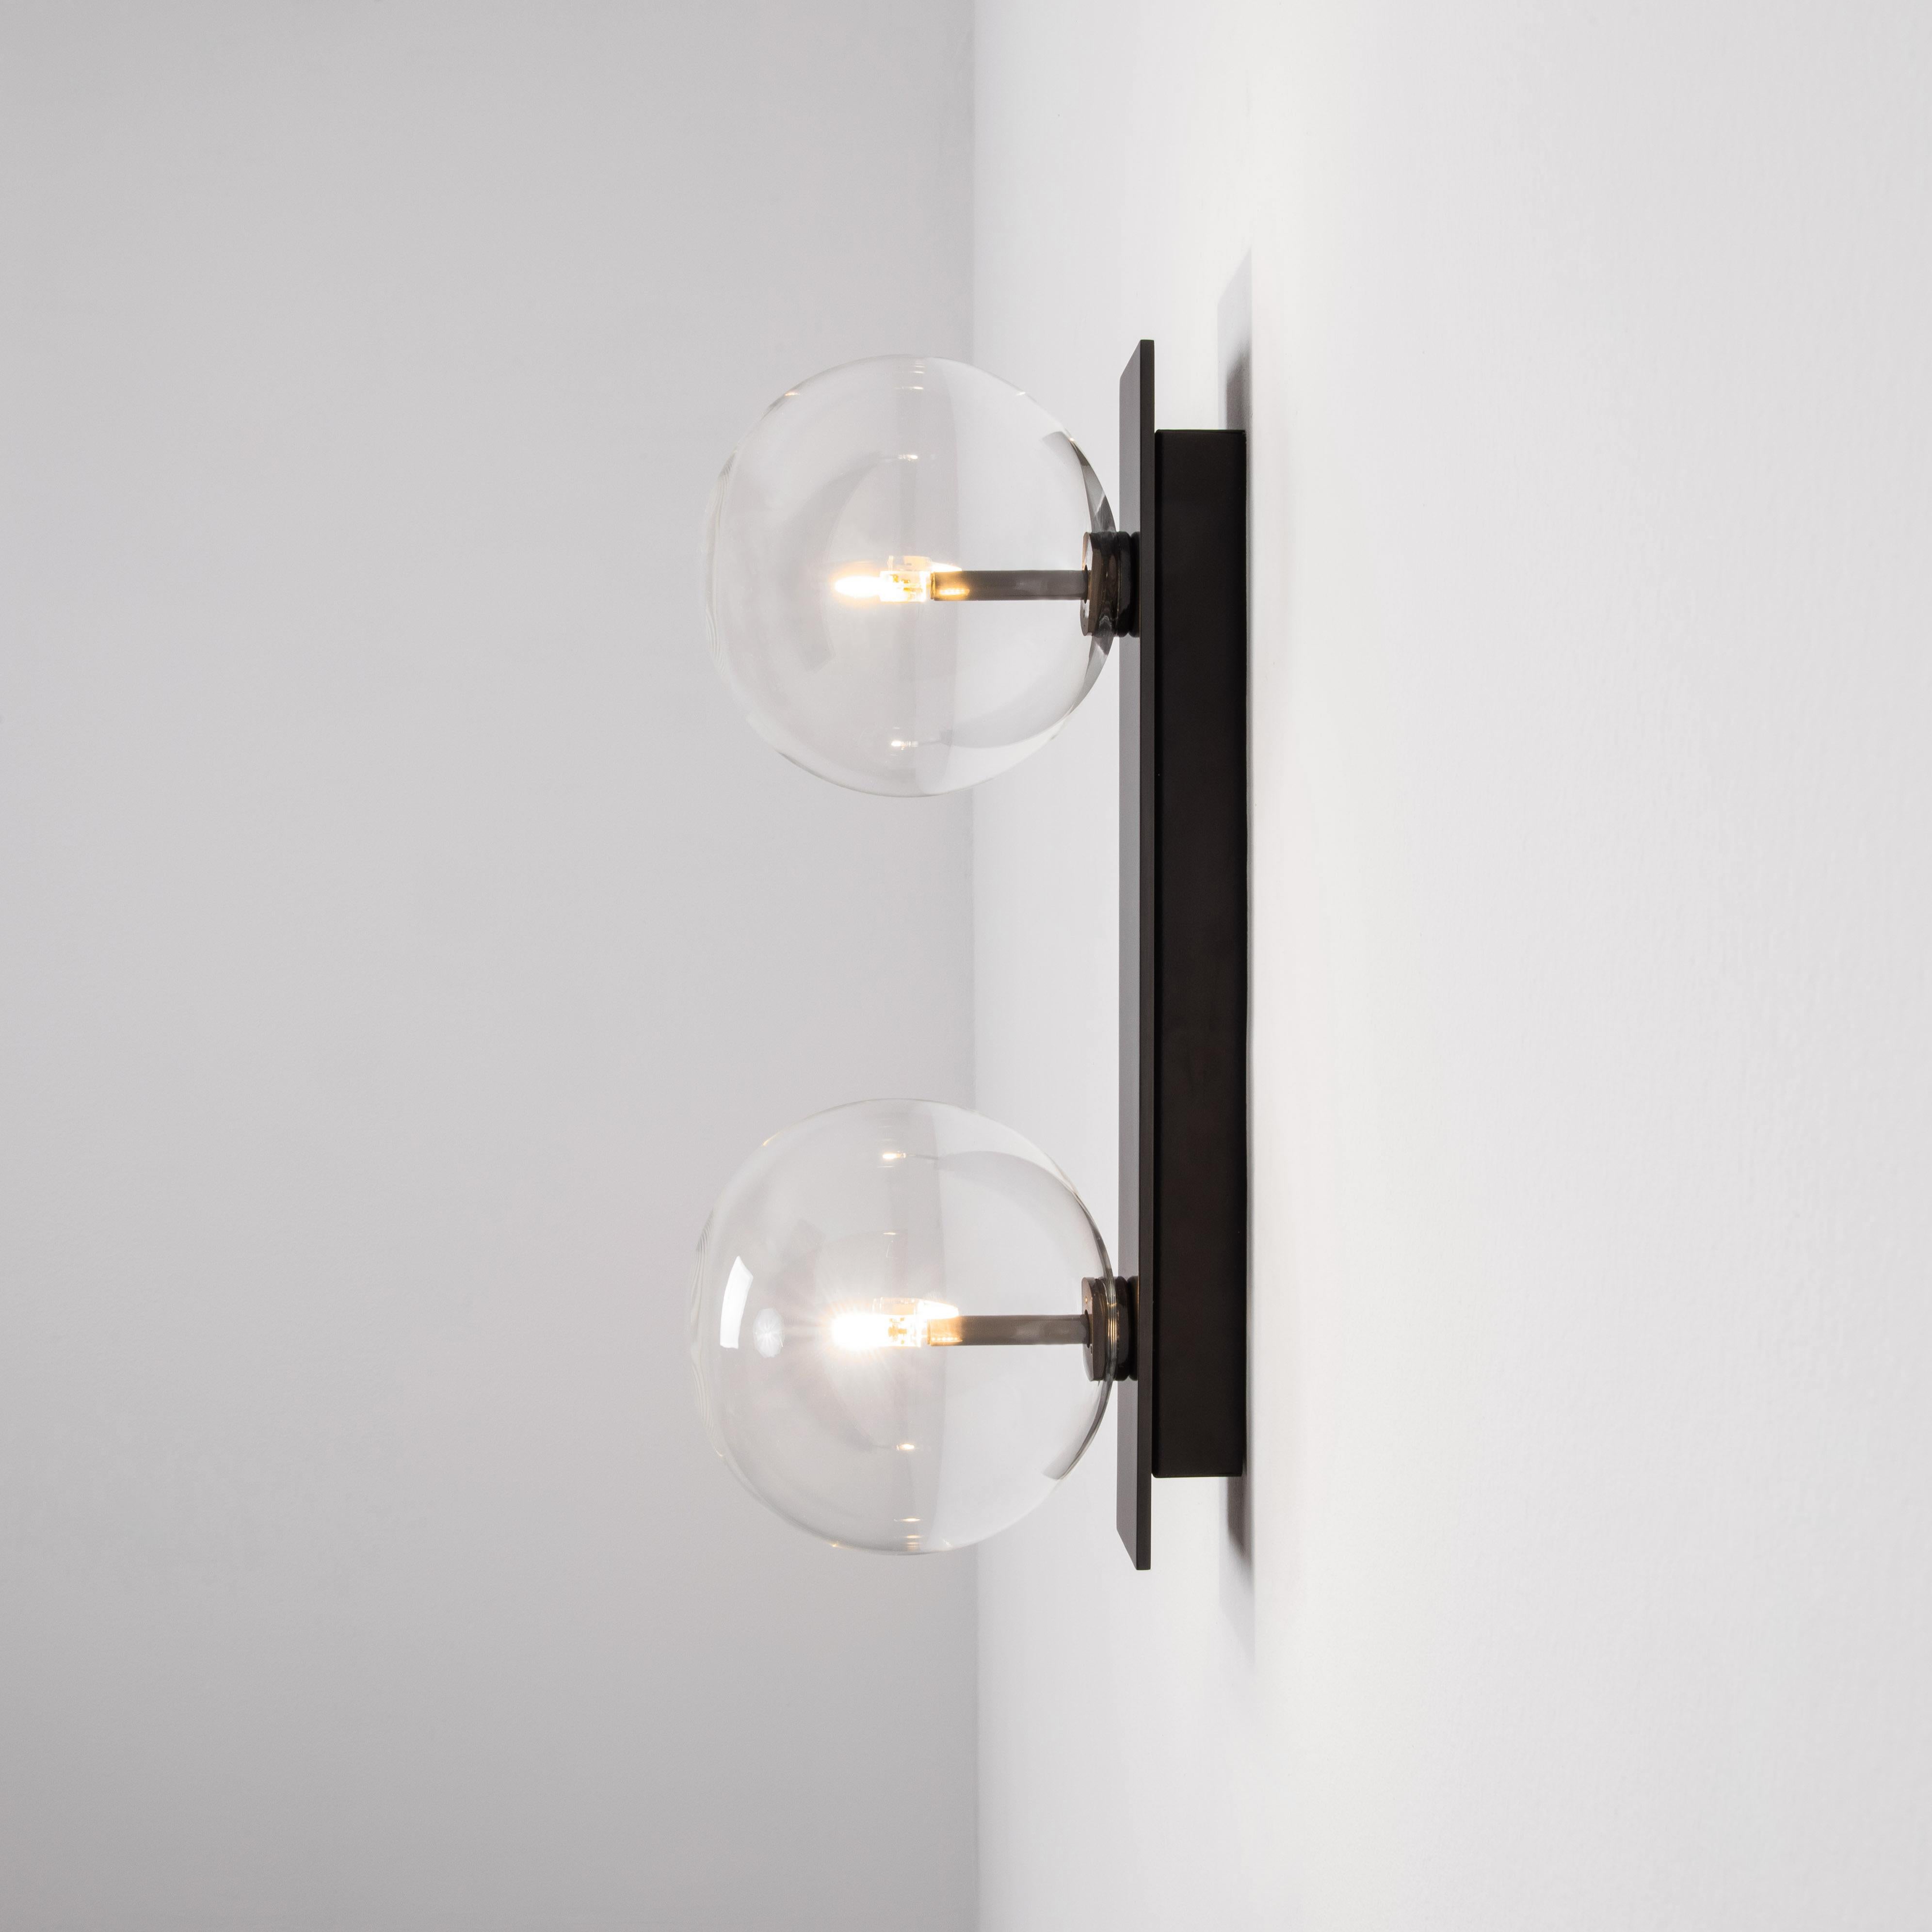 Glass Oslo Wall Sconce by Schwung